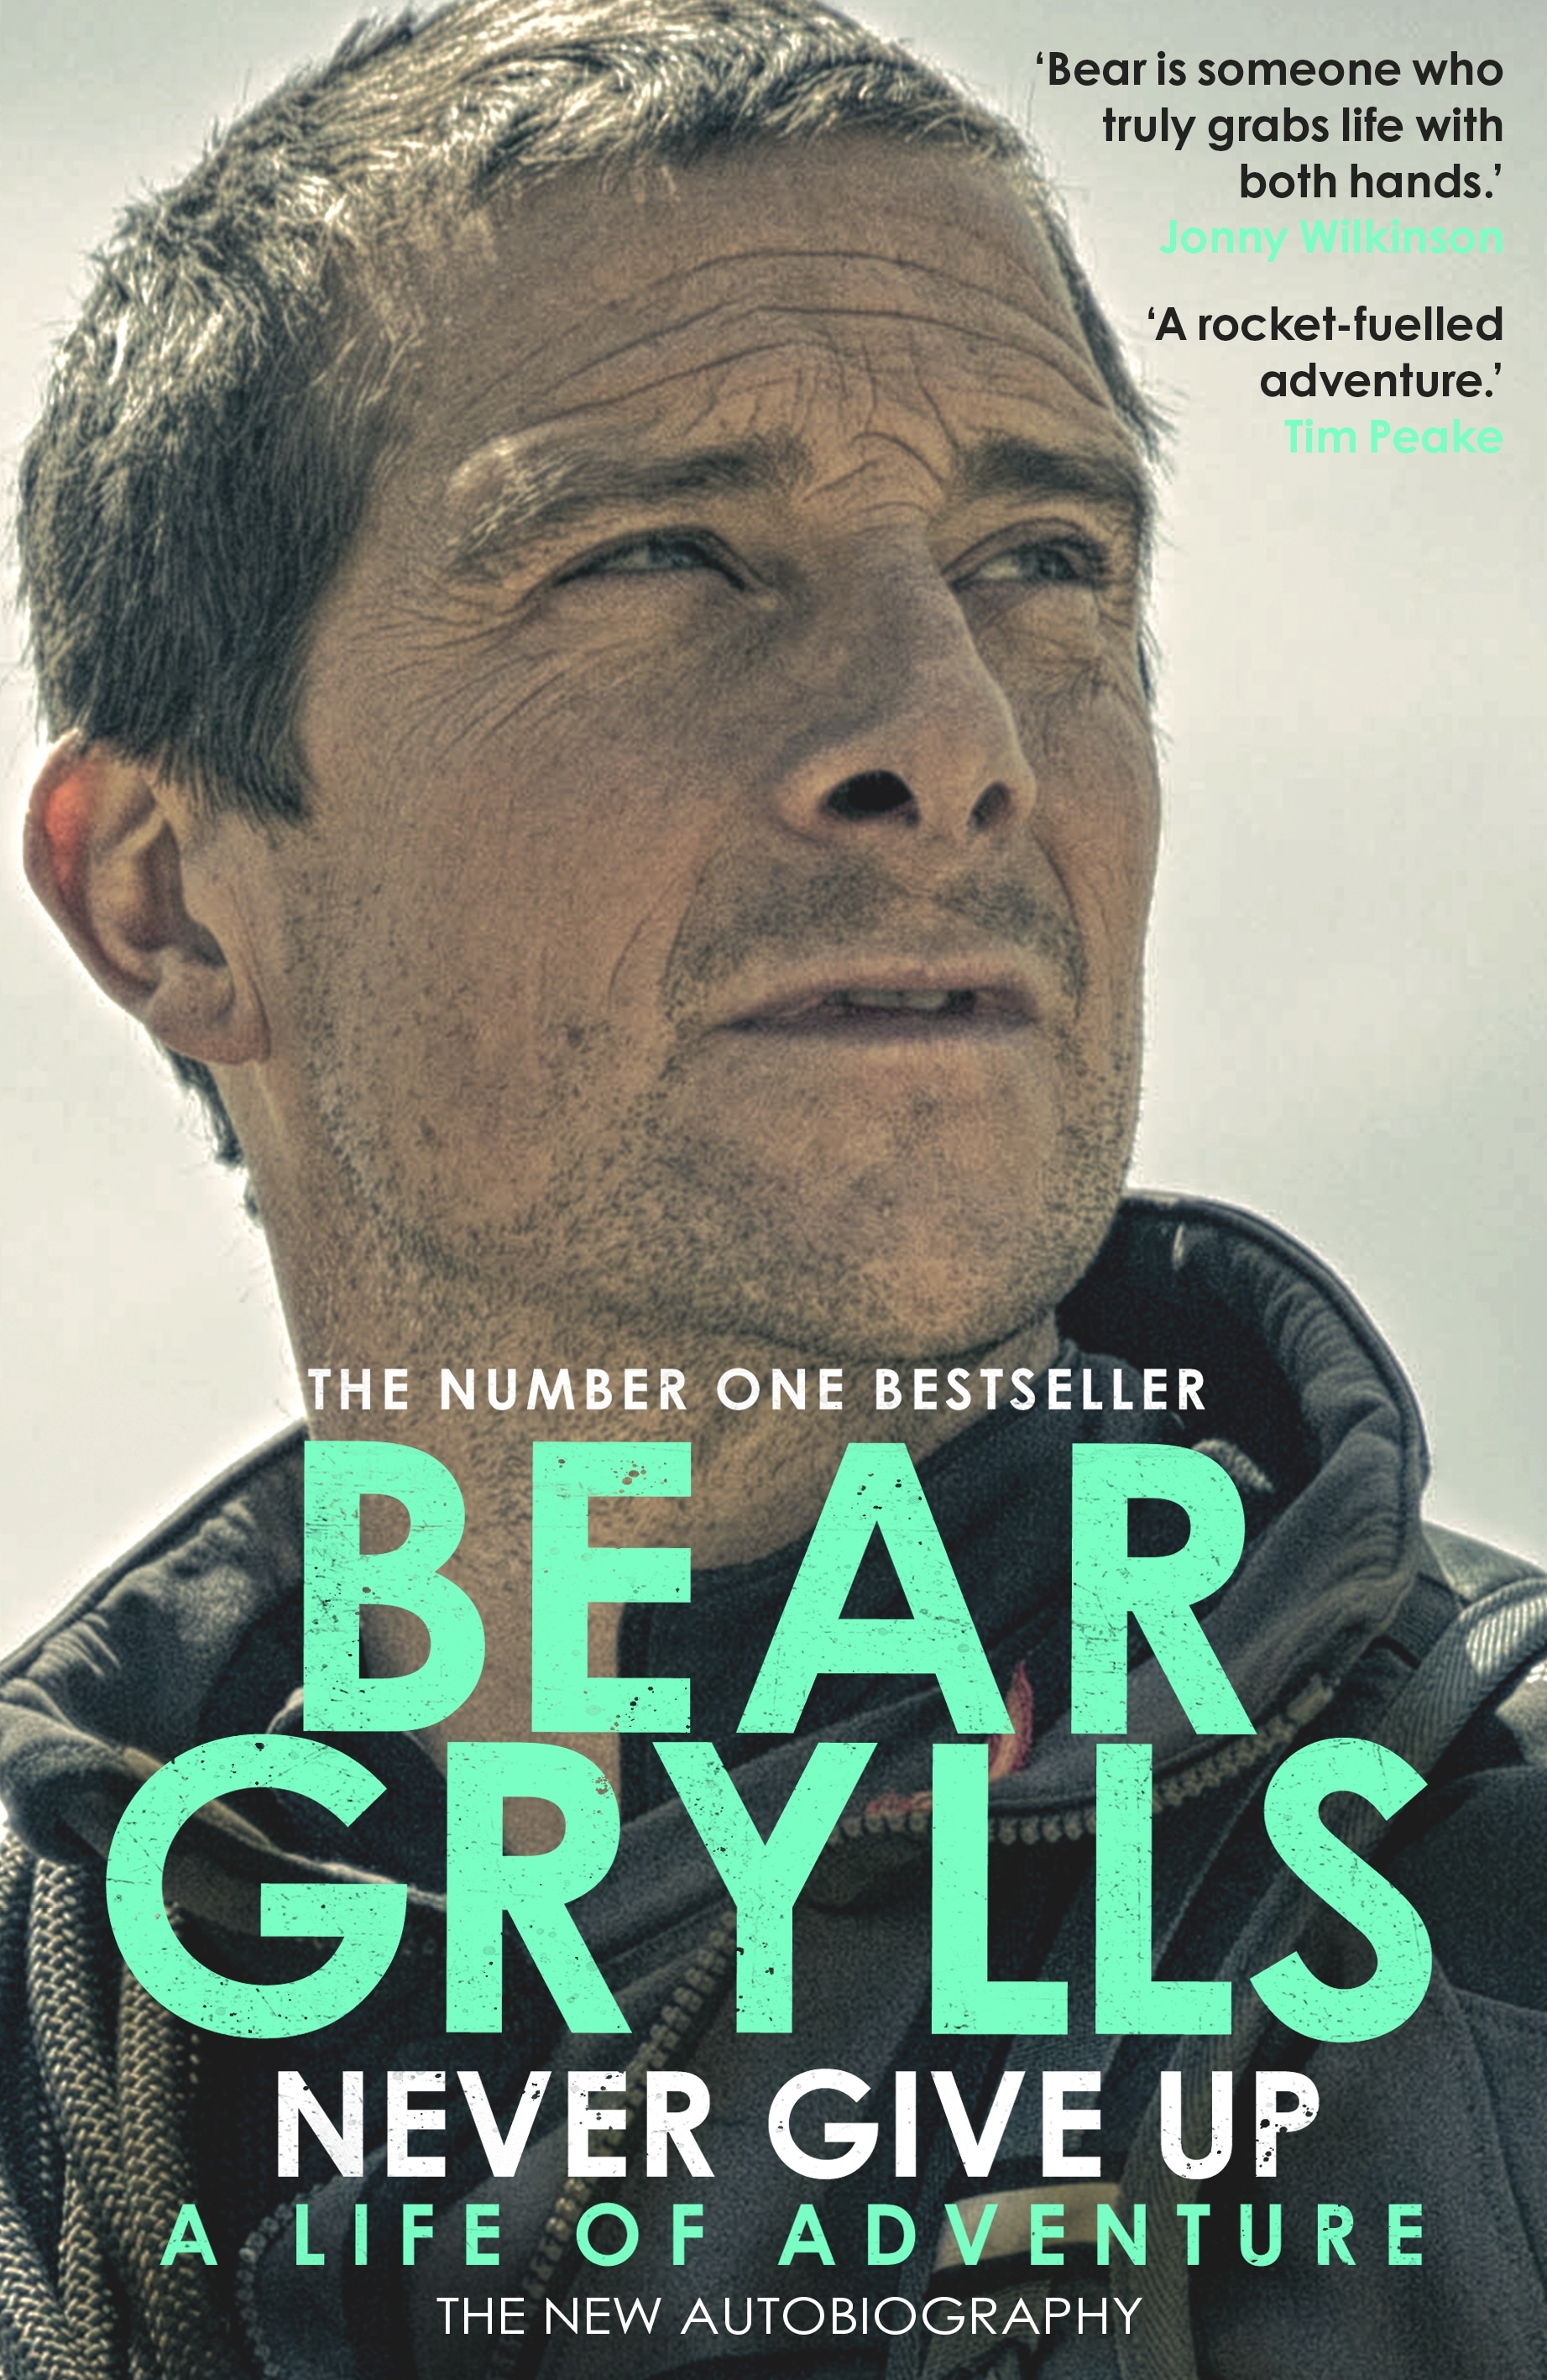 Book “Never Give Up” by Bear Grylls — October 28, 2021